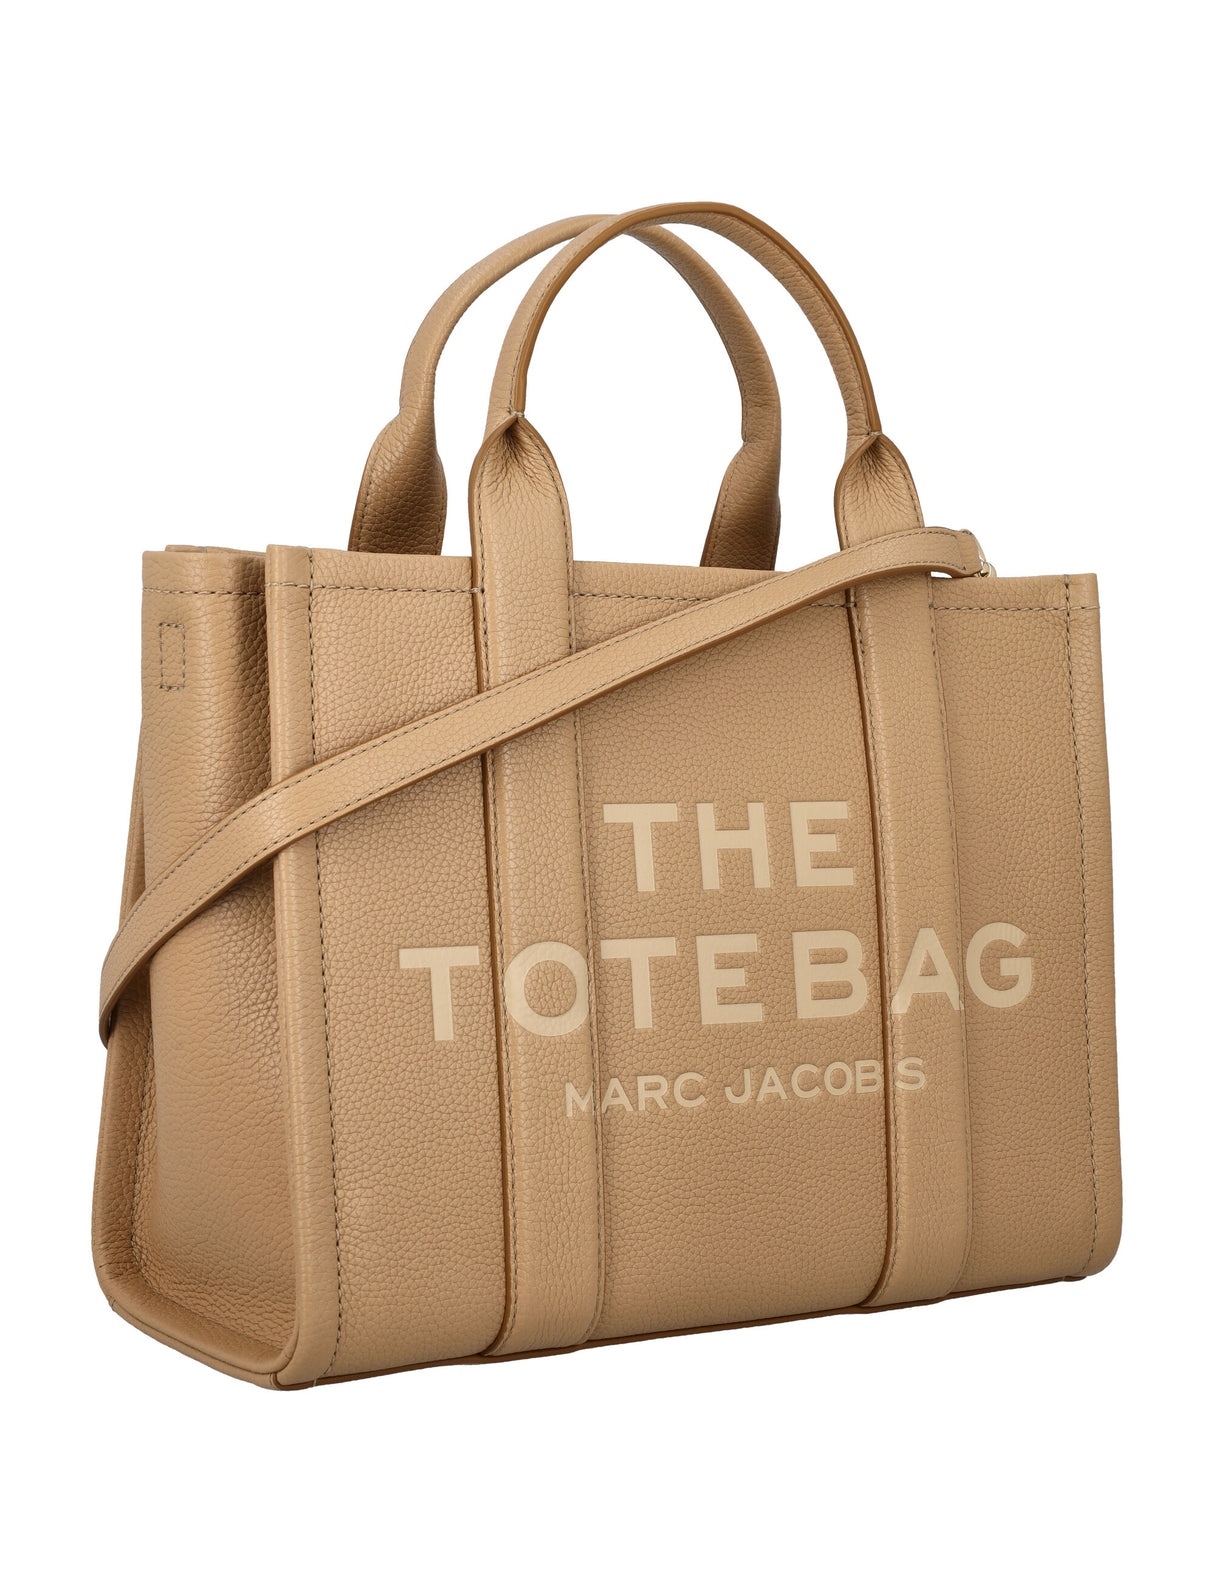 MARC JACOBS Beige Leather Mini Tote Handbag with Adjustable Strap and Logo Detailing